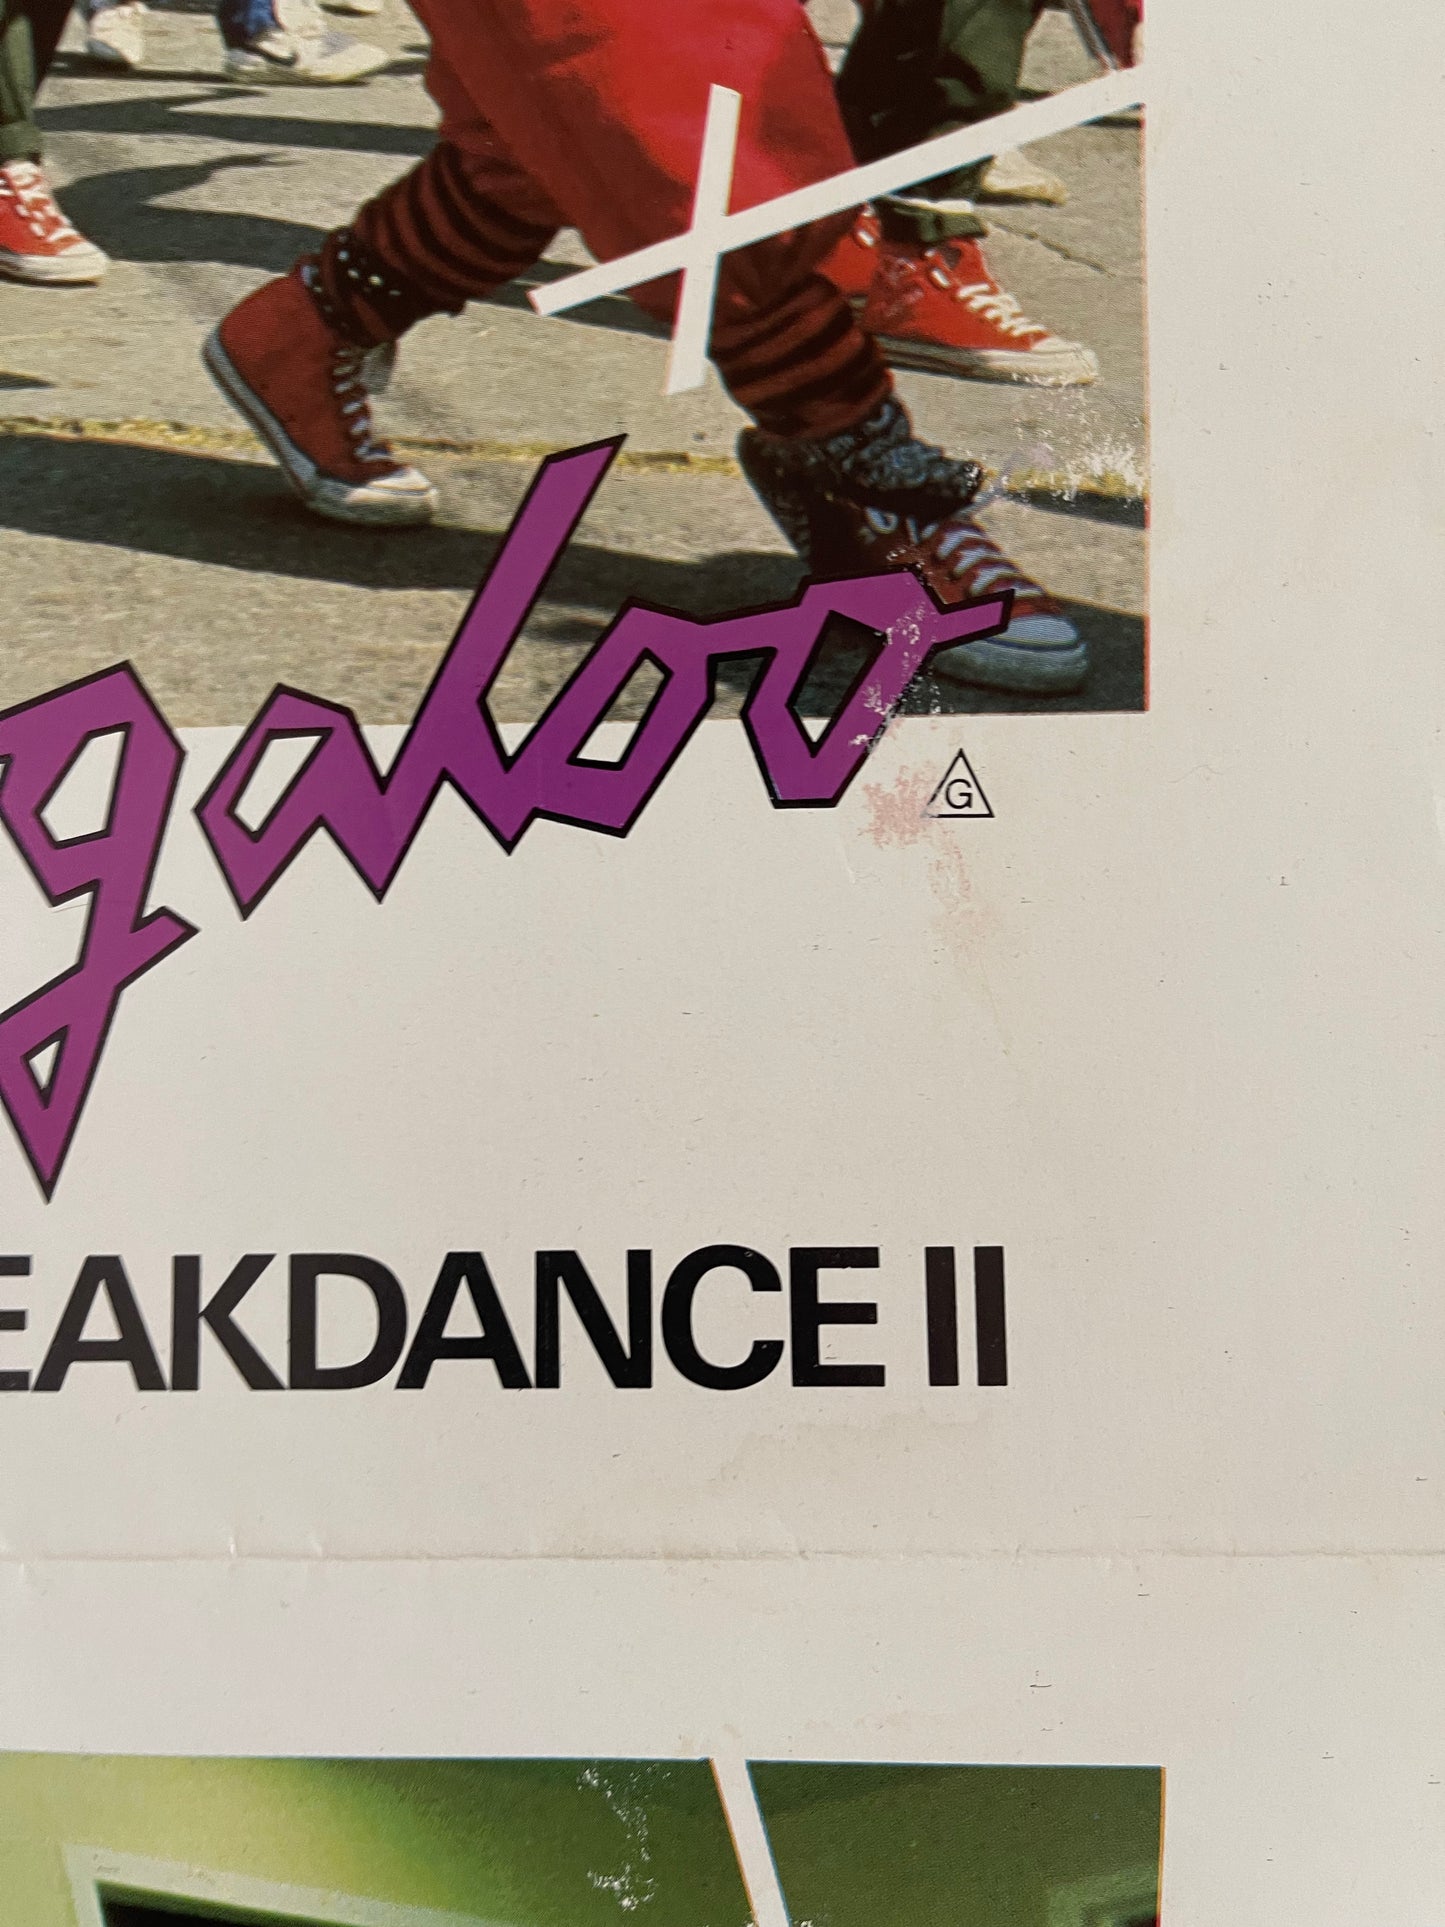 Breakdance 2: Electric Boogaloo (1984) - Lobby Card One Sheet